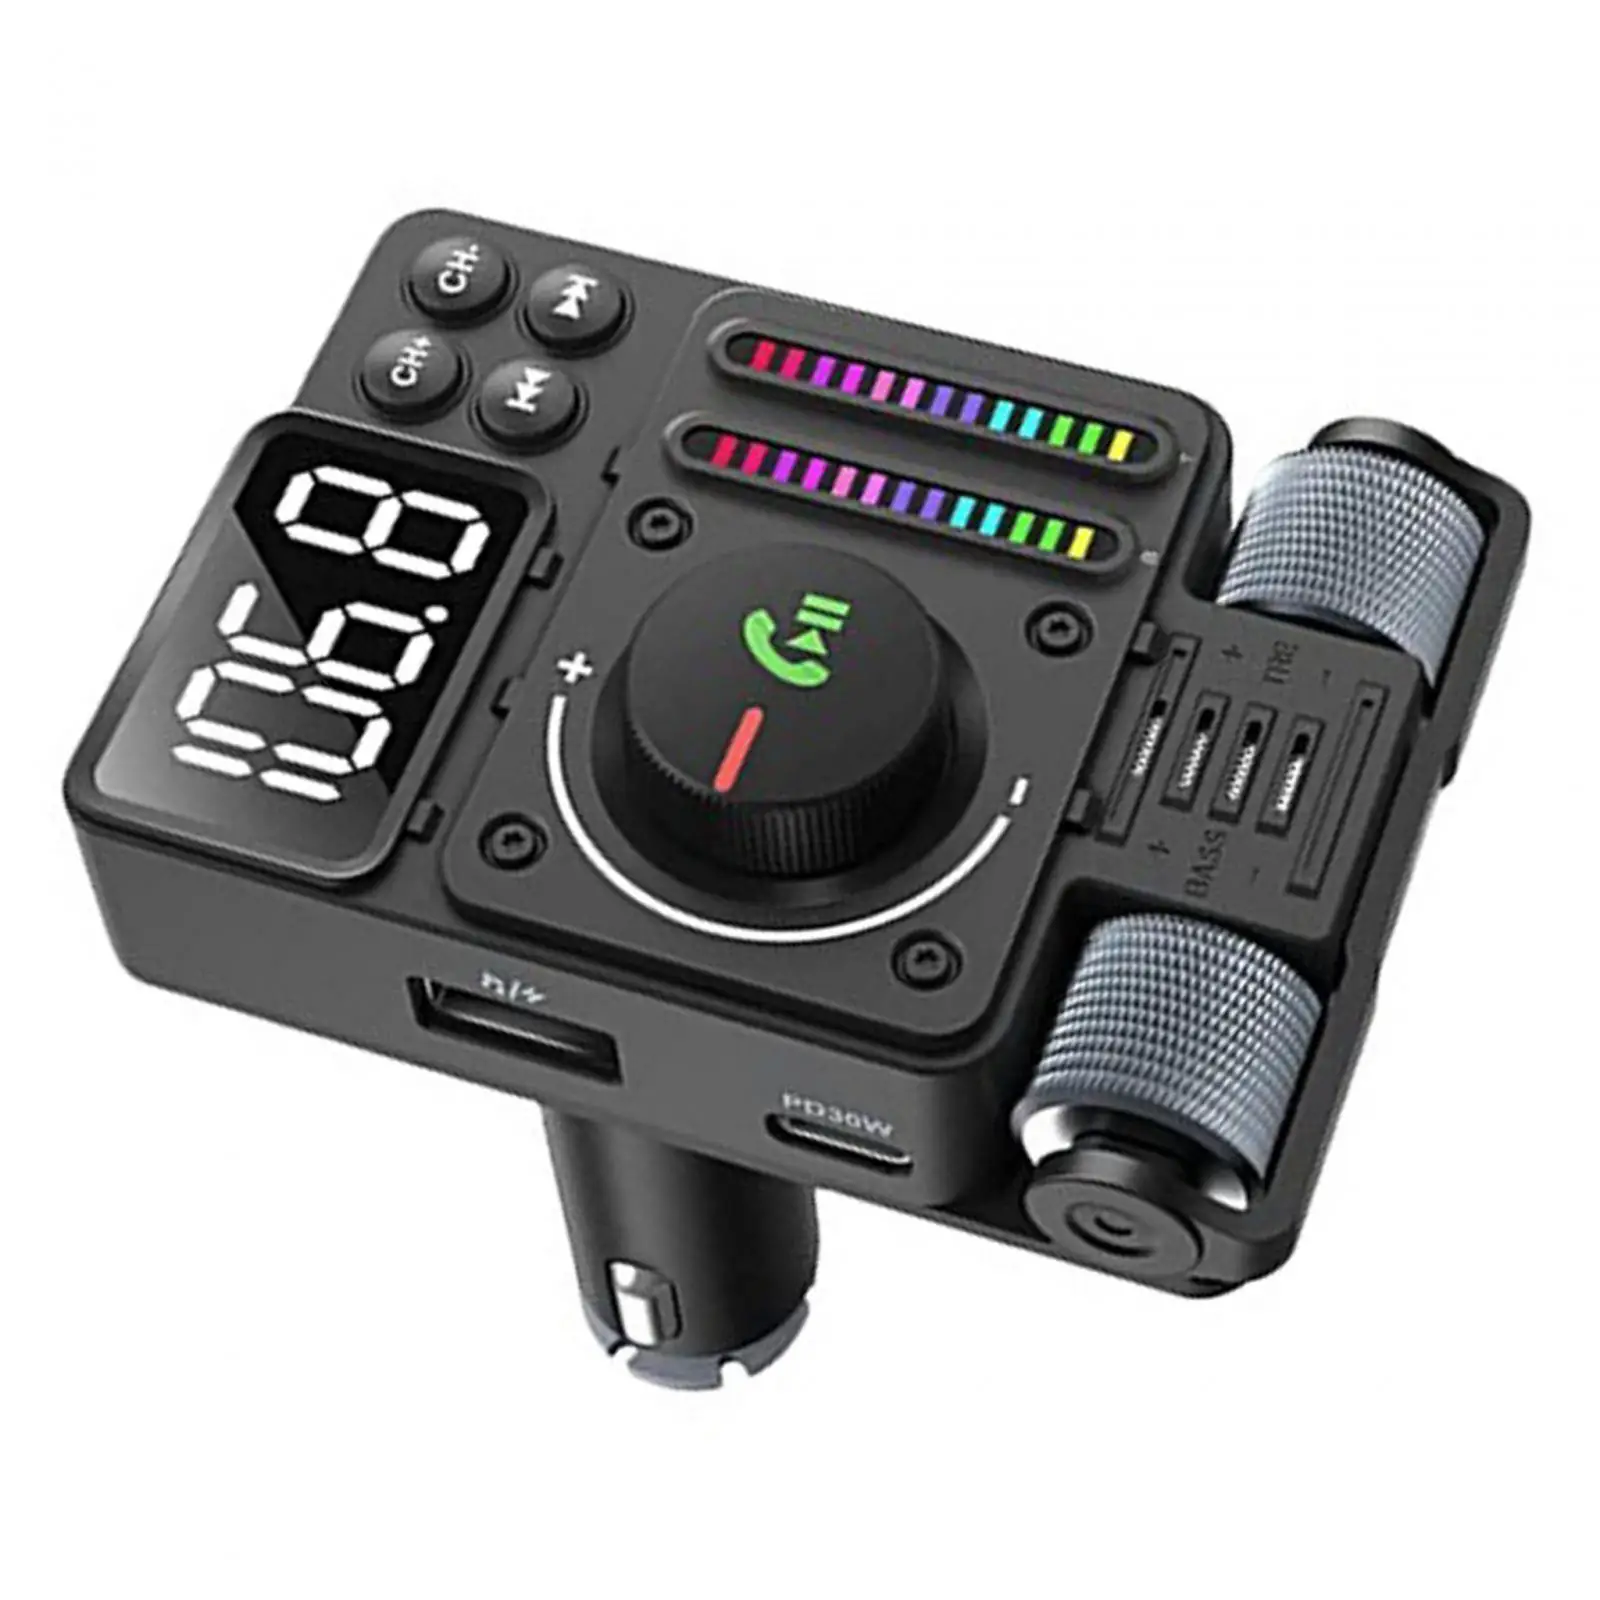 Bluetooth FM Transmitter Vehicle Stable Performance Replace Wireless Radio